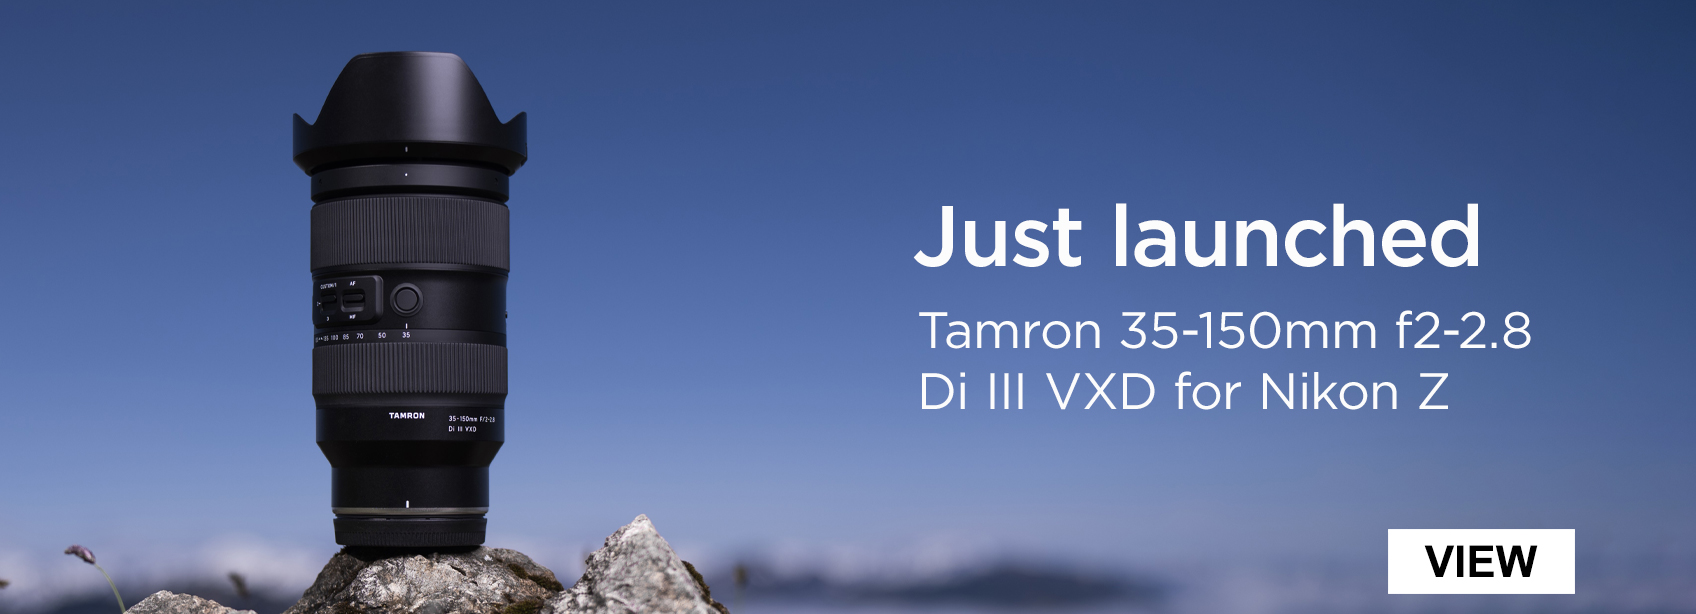 Just launched. Tamron 35-150mm f2-2.8 Di III VXD for Nikon Z